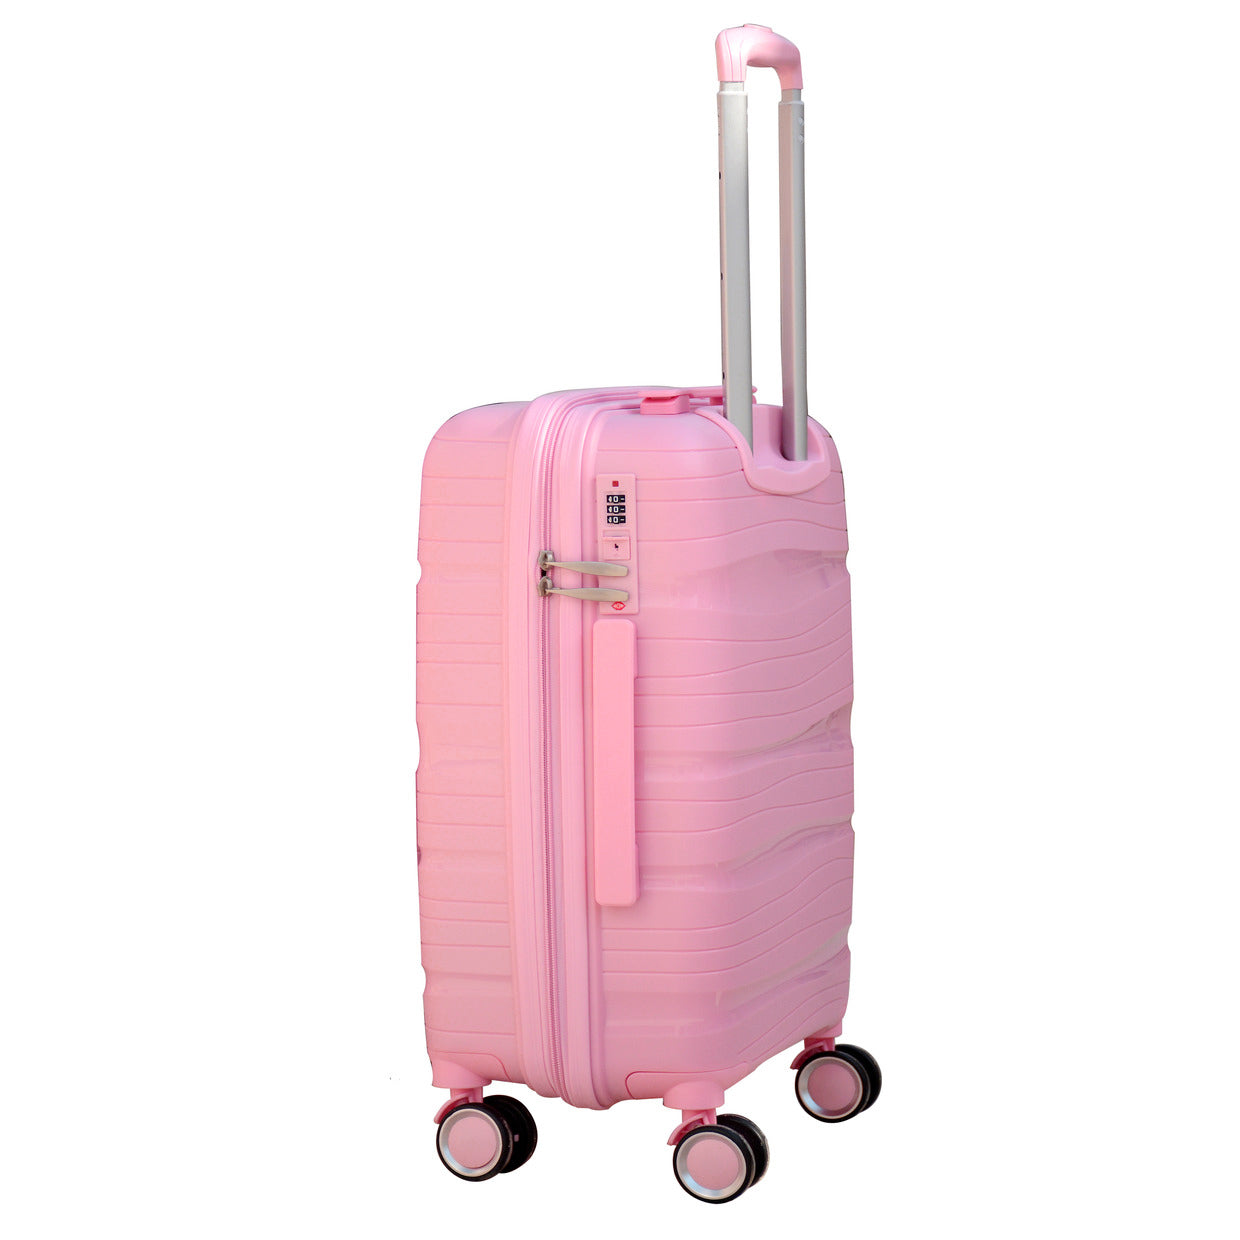 24" Pink Colour Royal PP Luggage Lightweight Hard Case Trolley Bag with Double Spinner Wheel